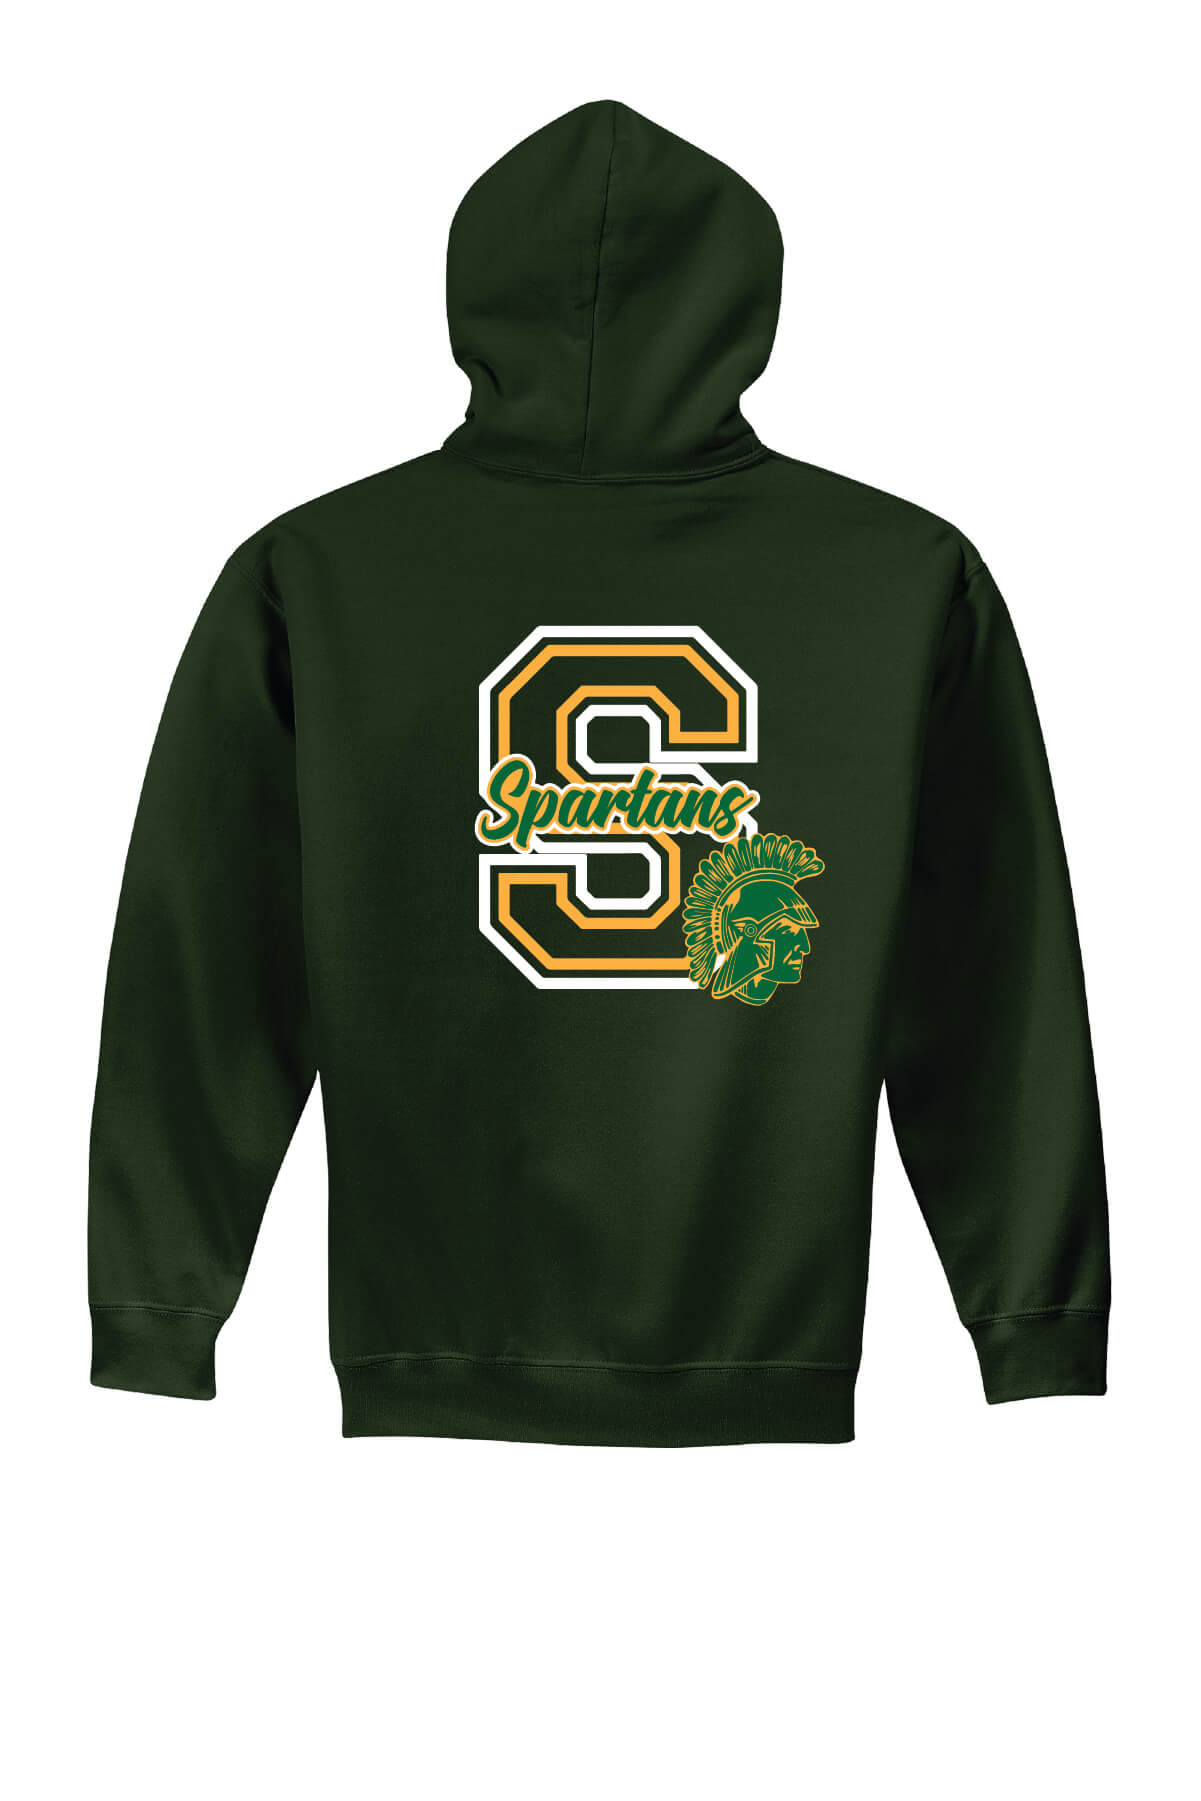 Spartans "S" Hoodie back-green